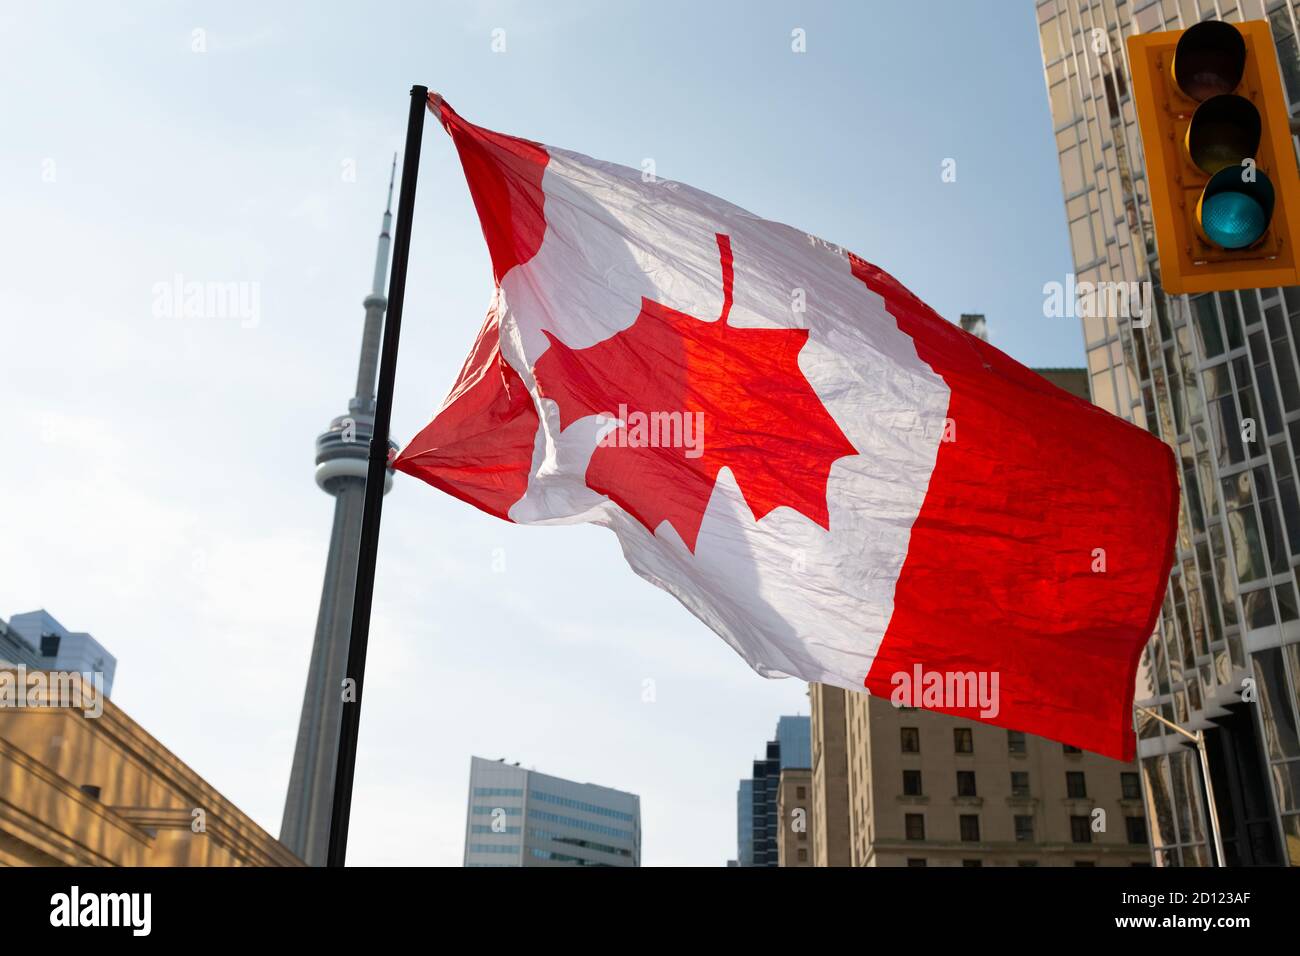 A Canada Flag is flown upside-down at a protest in Toronto, Ontario, to signify a nation in distress at the second 'March for Freedom' from COVID-19. Stock Photo